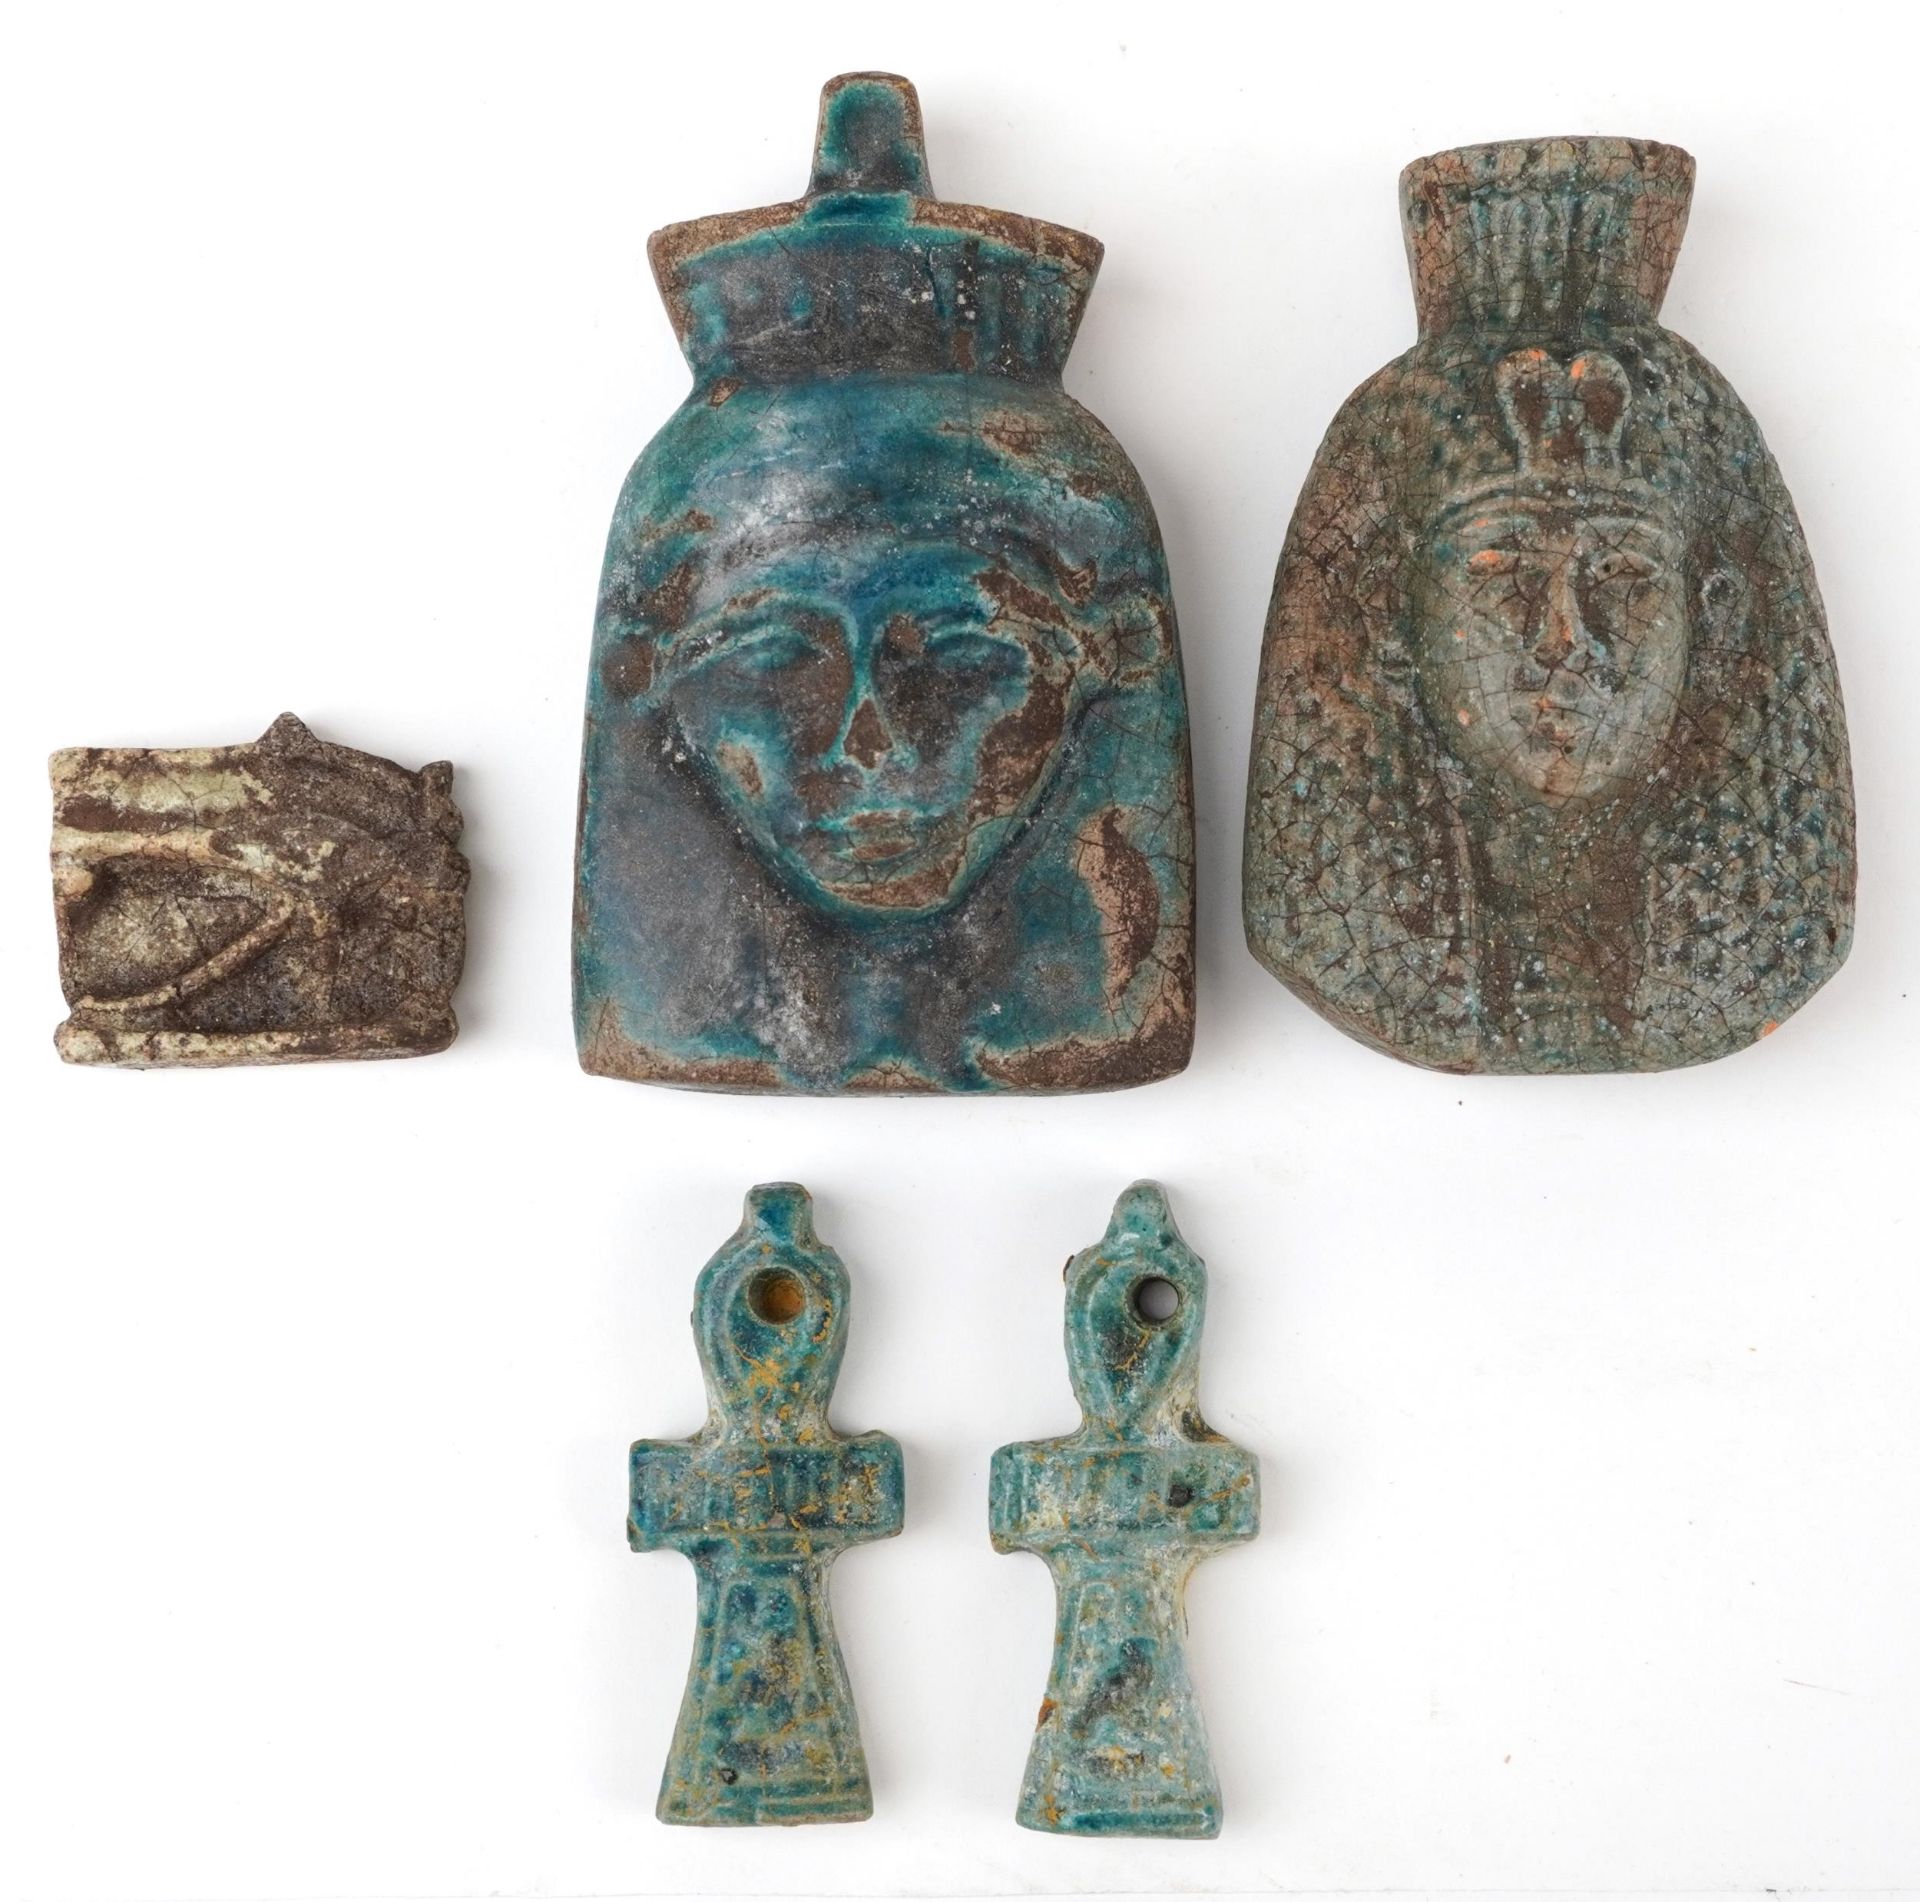 Two Egyptian style faience glazed amulets and three others, the largest 11cm high : For further